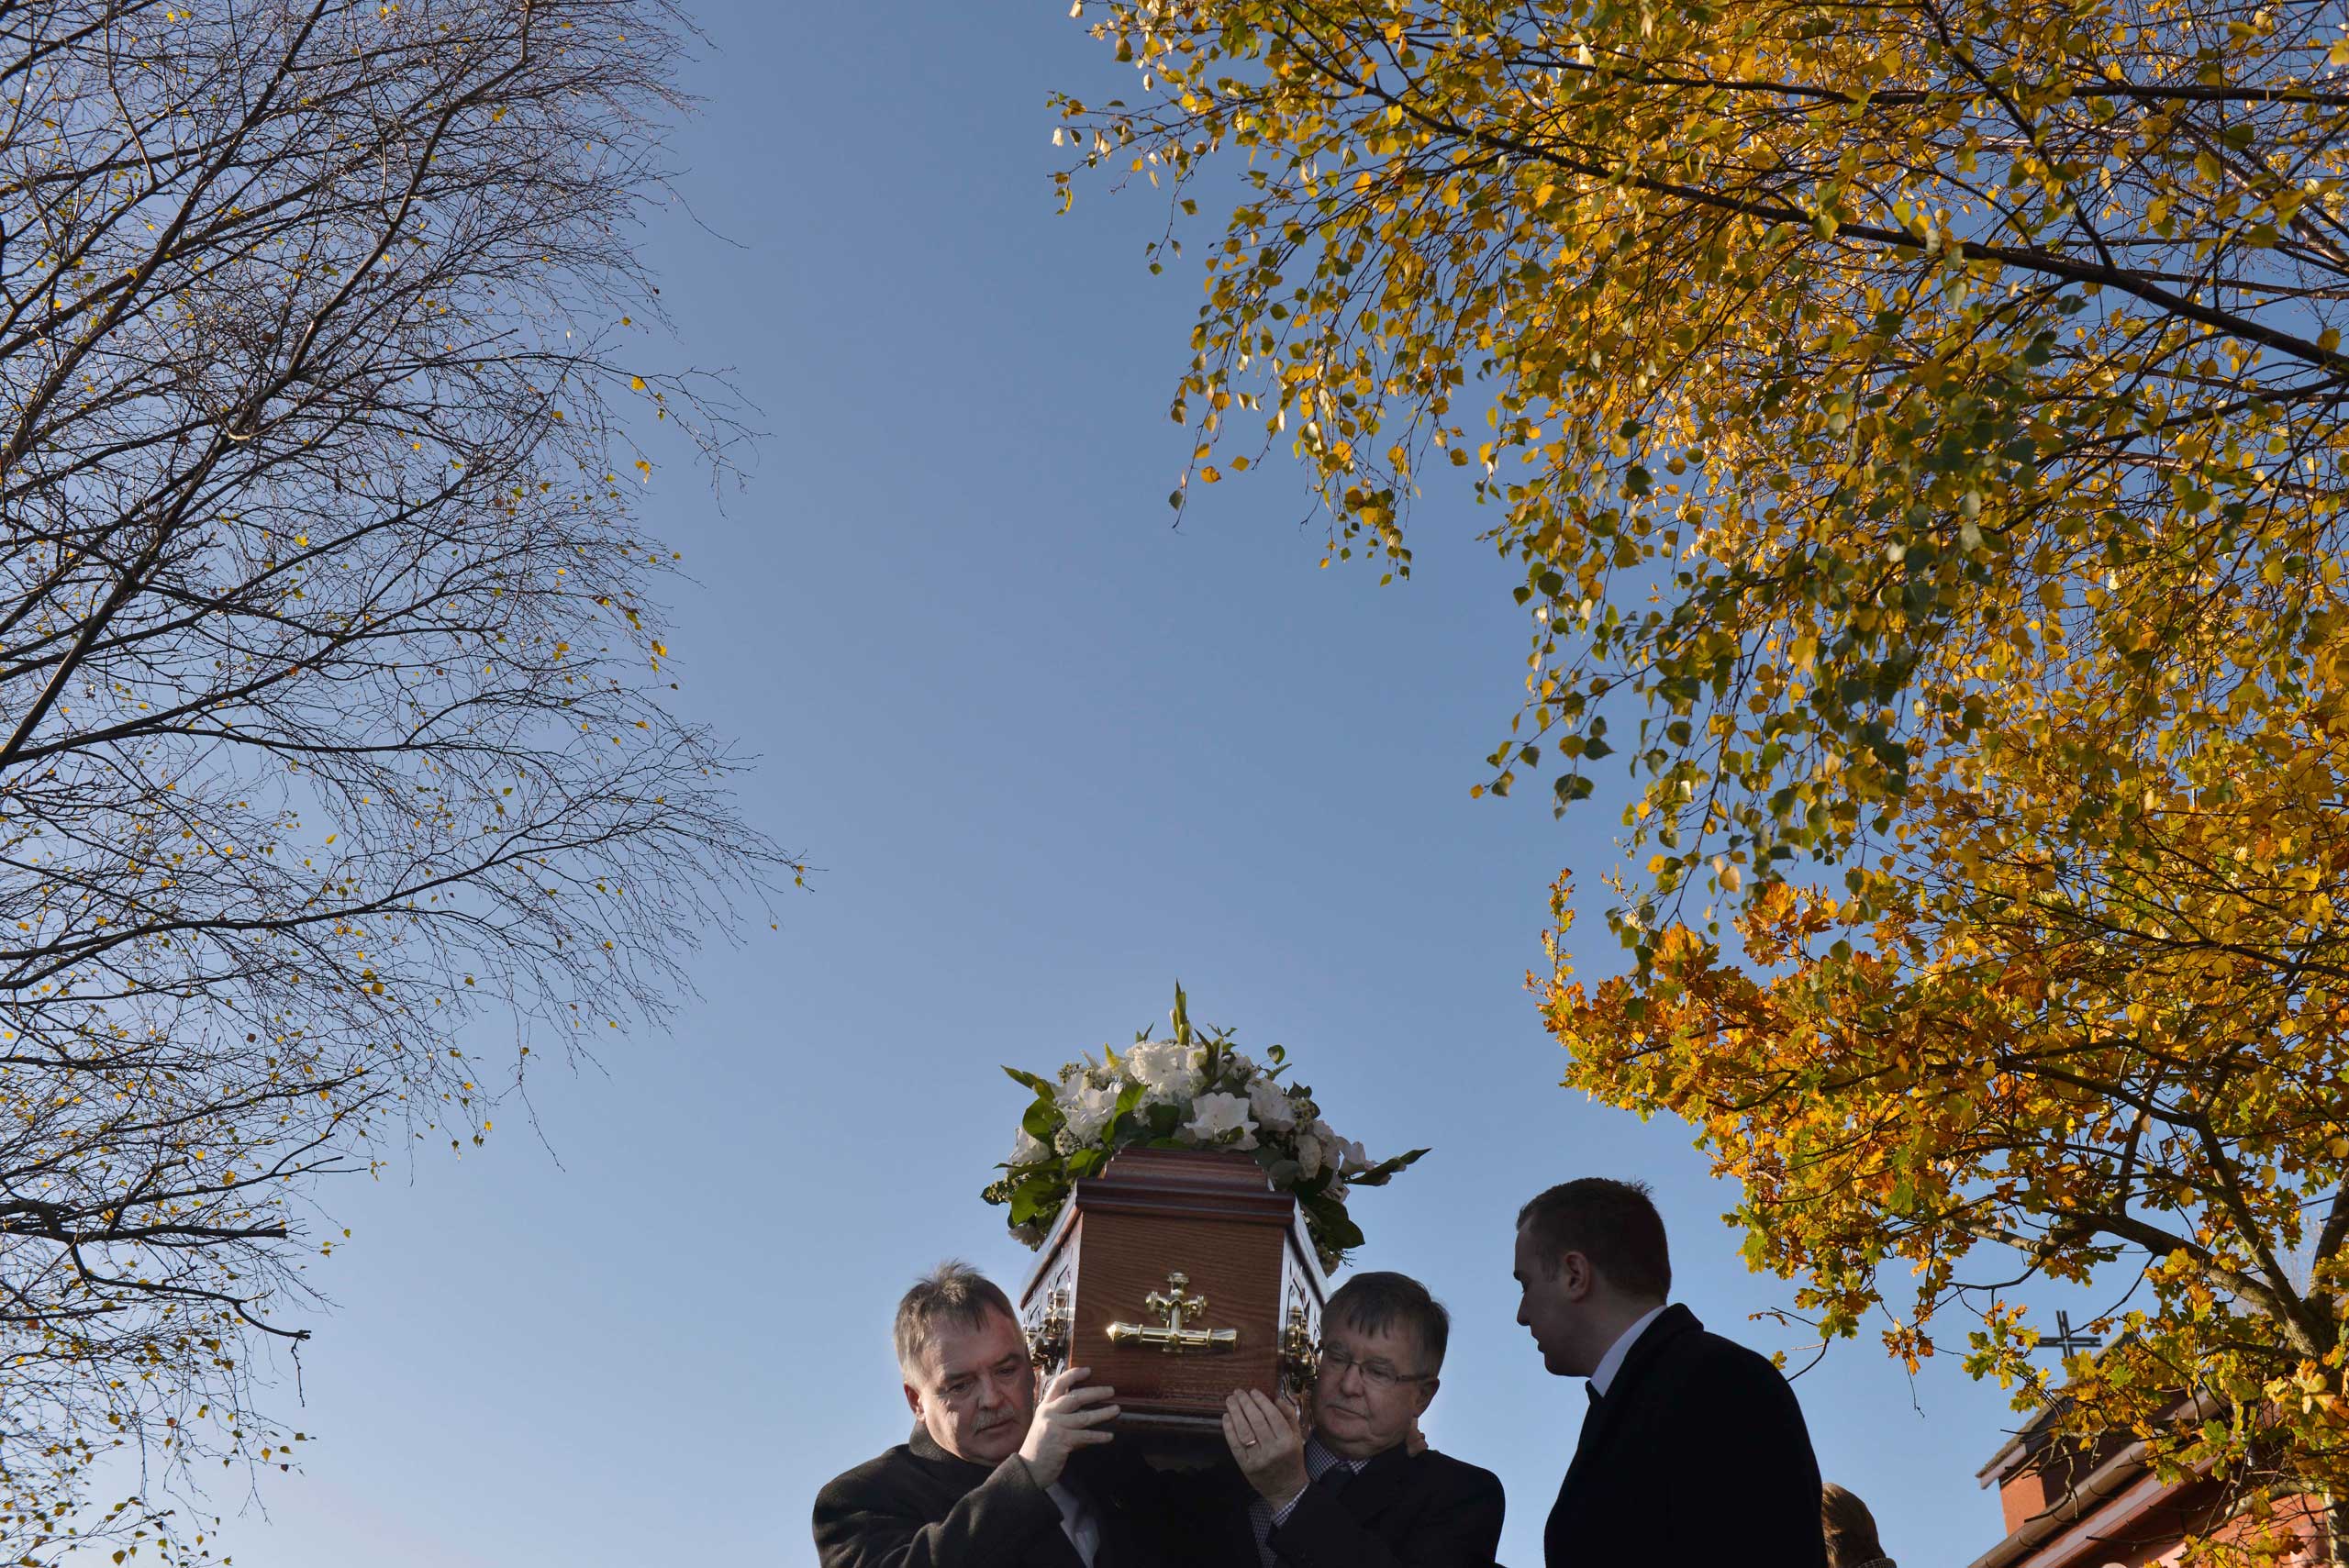 Nov. 14, 2014.  Kieran Megraw (L) and Sean Megraw (R) carry the remains of their brother Brendan as the funeral takes place of Brendan Megraw, known as one of 'the Disappeared' in Belfast, Northern Ireland. Brendan Megraw was taken from his home on the Twinbrook estate in west Belfast in 1978. It was believed that he had been abducted, shot dead and then secretly buried by the IRA who claimed he was working as an agent for the security forces.